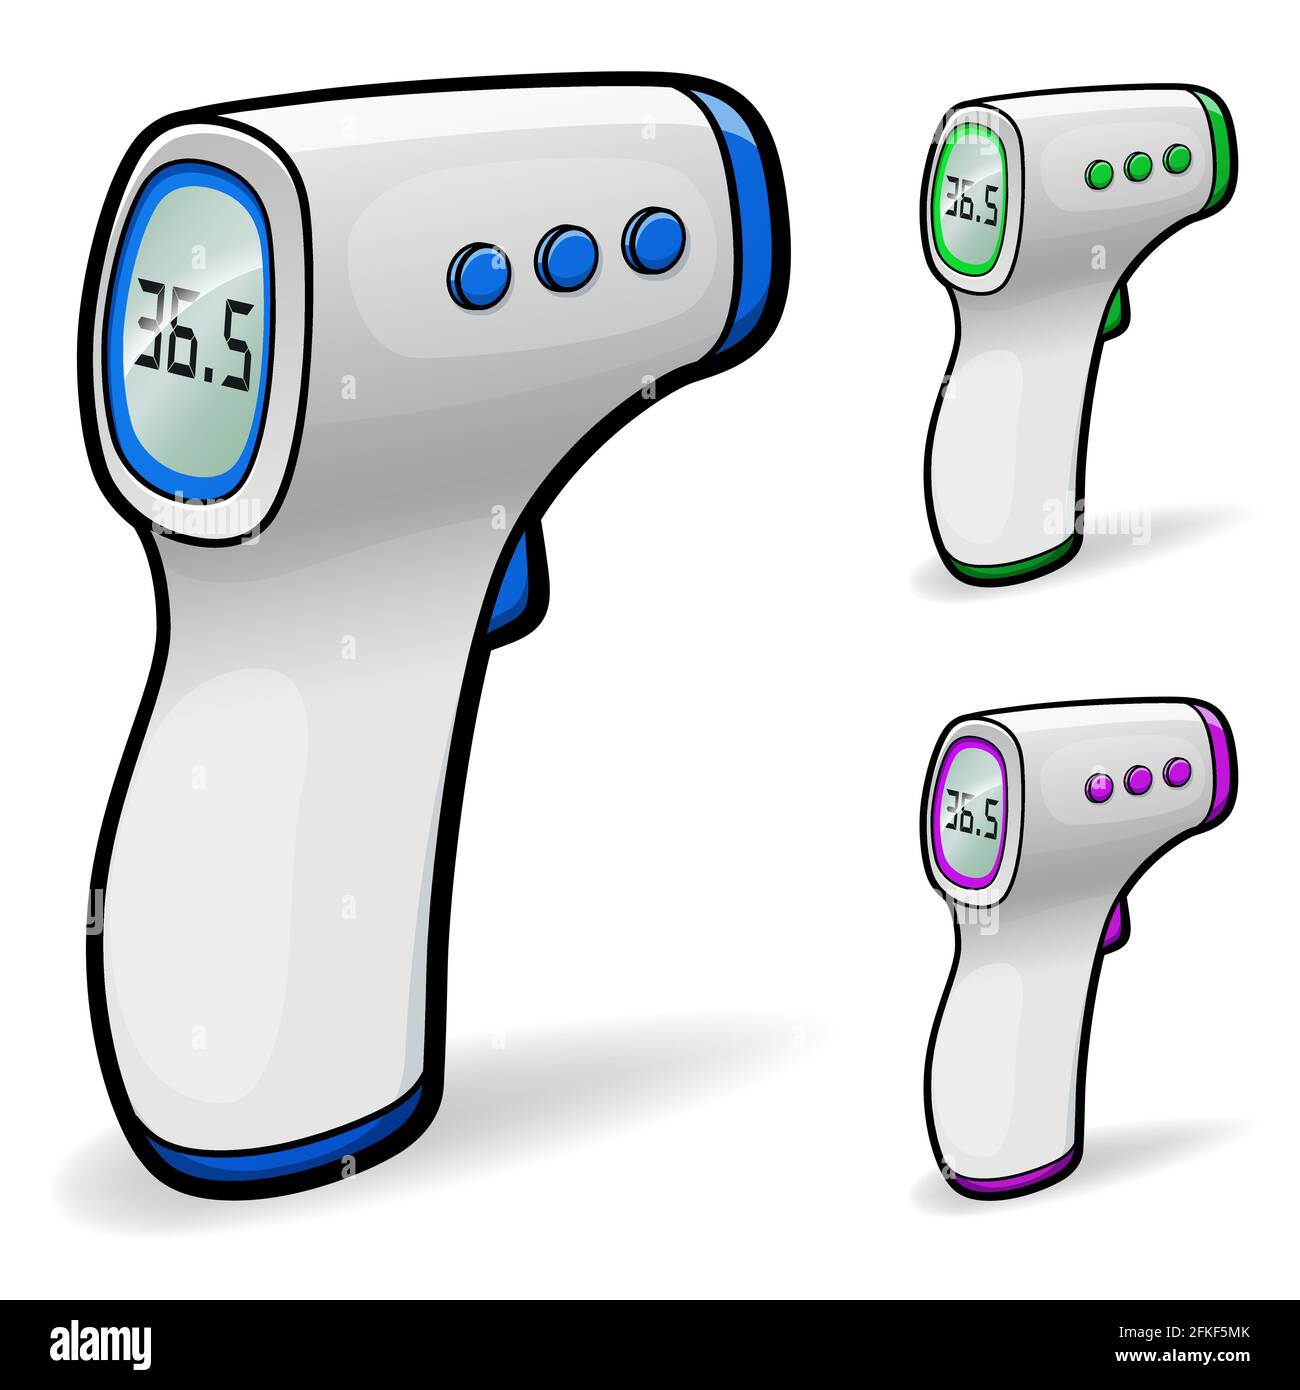 Vector illustration of infrared non-contact thermometer Stock Vector